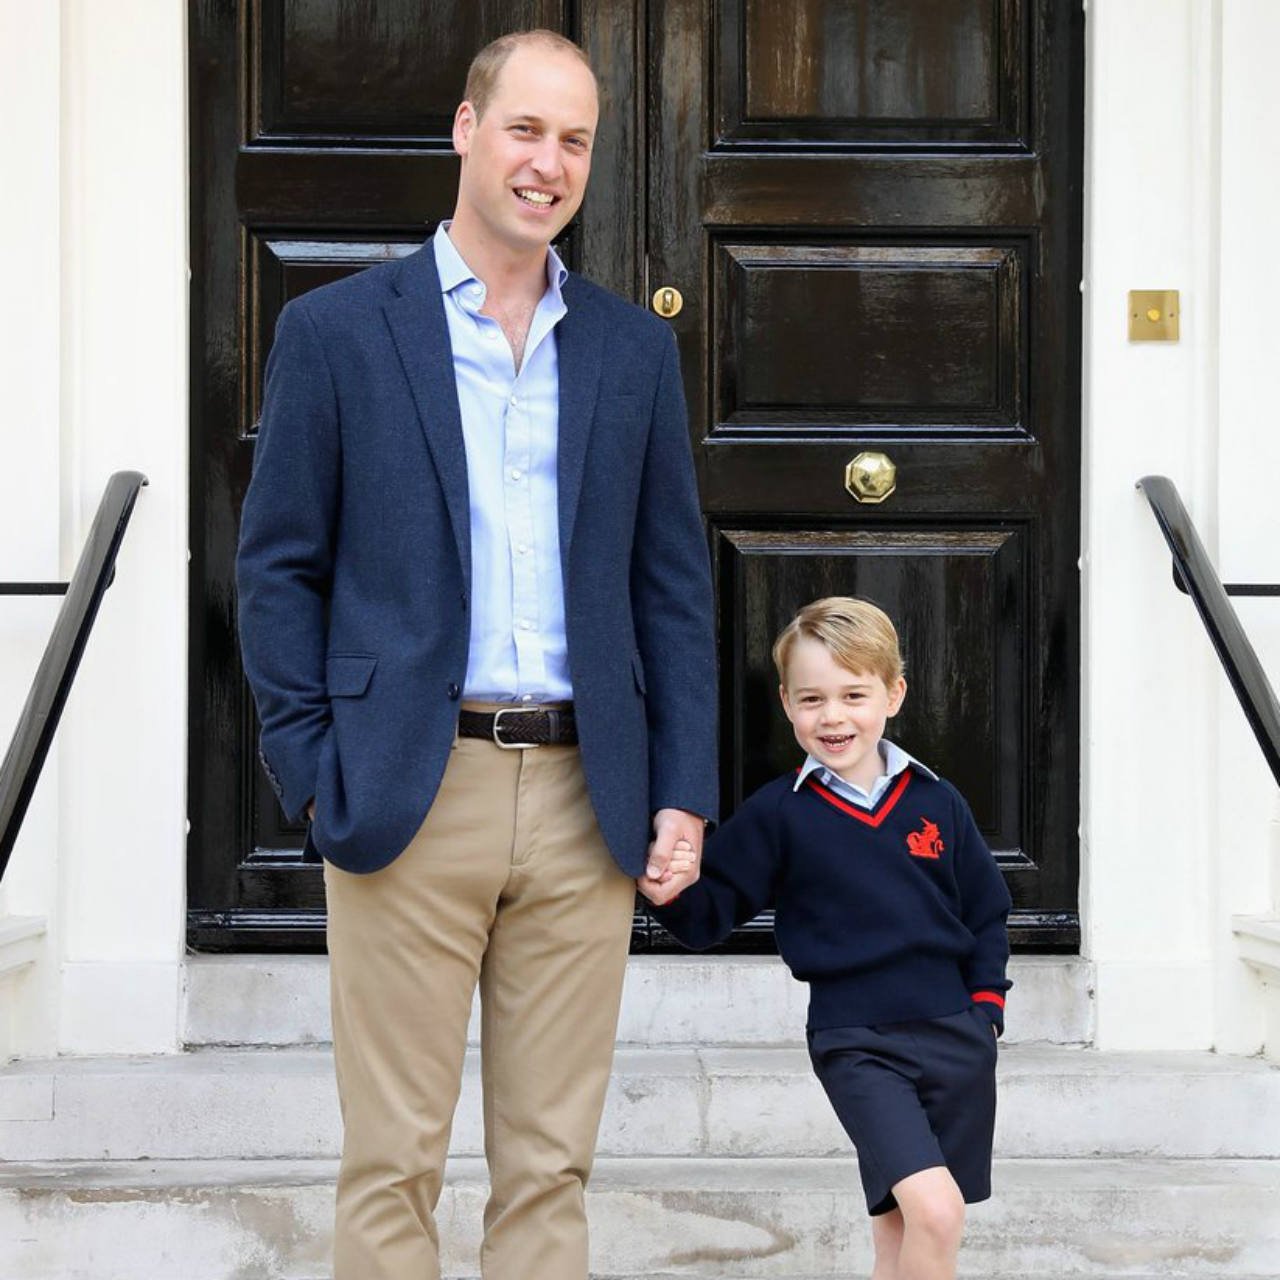 Prince George and Prince William smiling at the camera